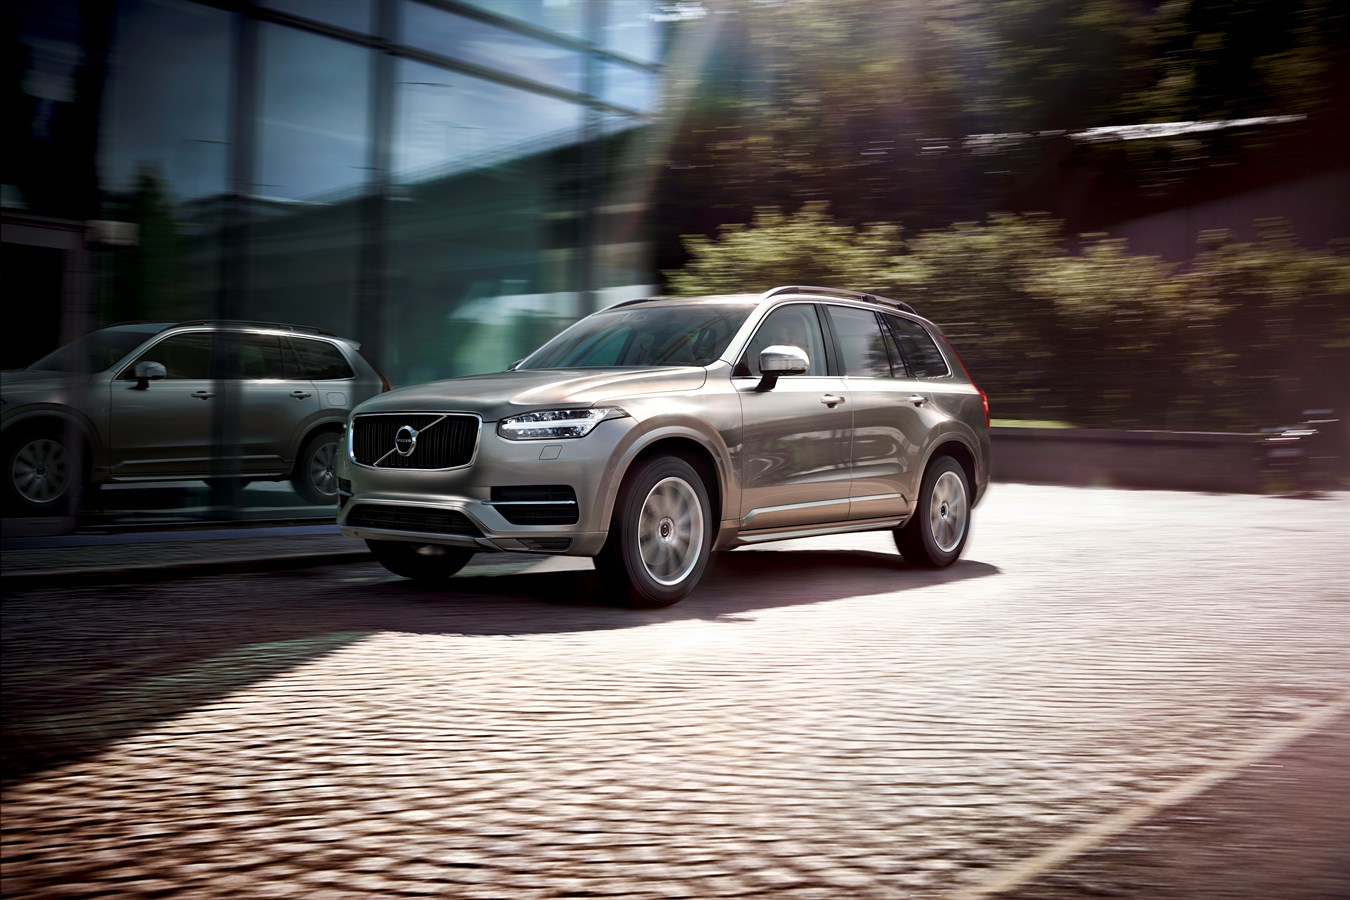 ALL-NEW VOLVO XC90 NAMED DIESEL CAR MAGAZINE’S BEST 4X4 OF 2015